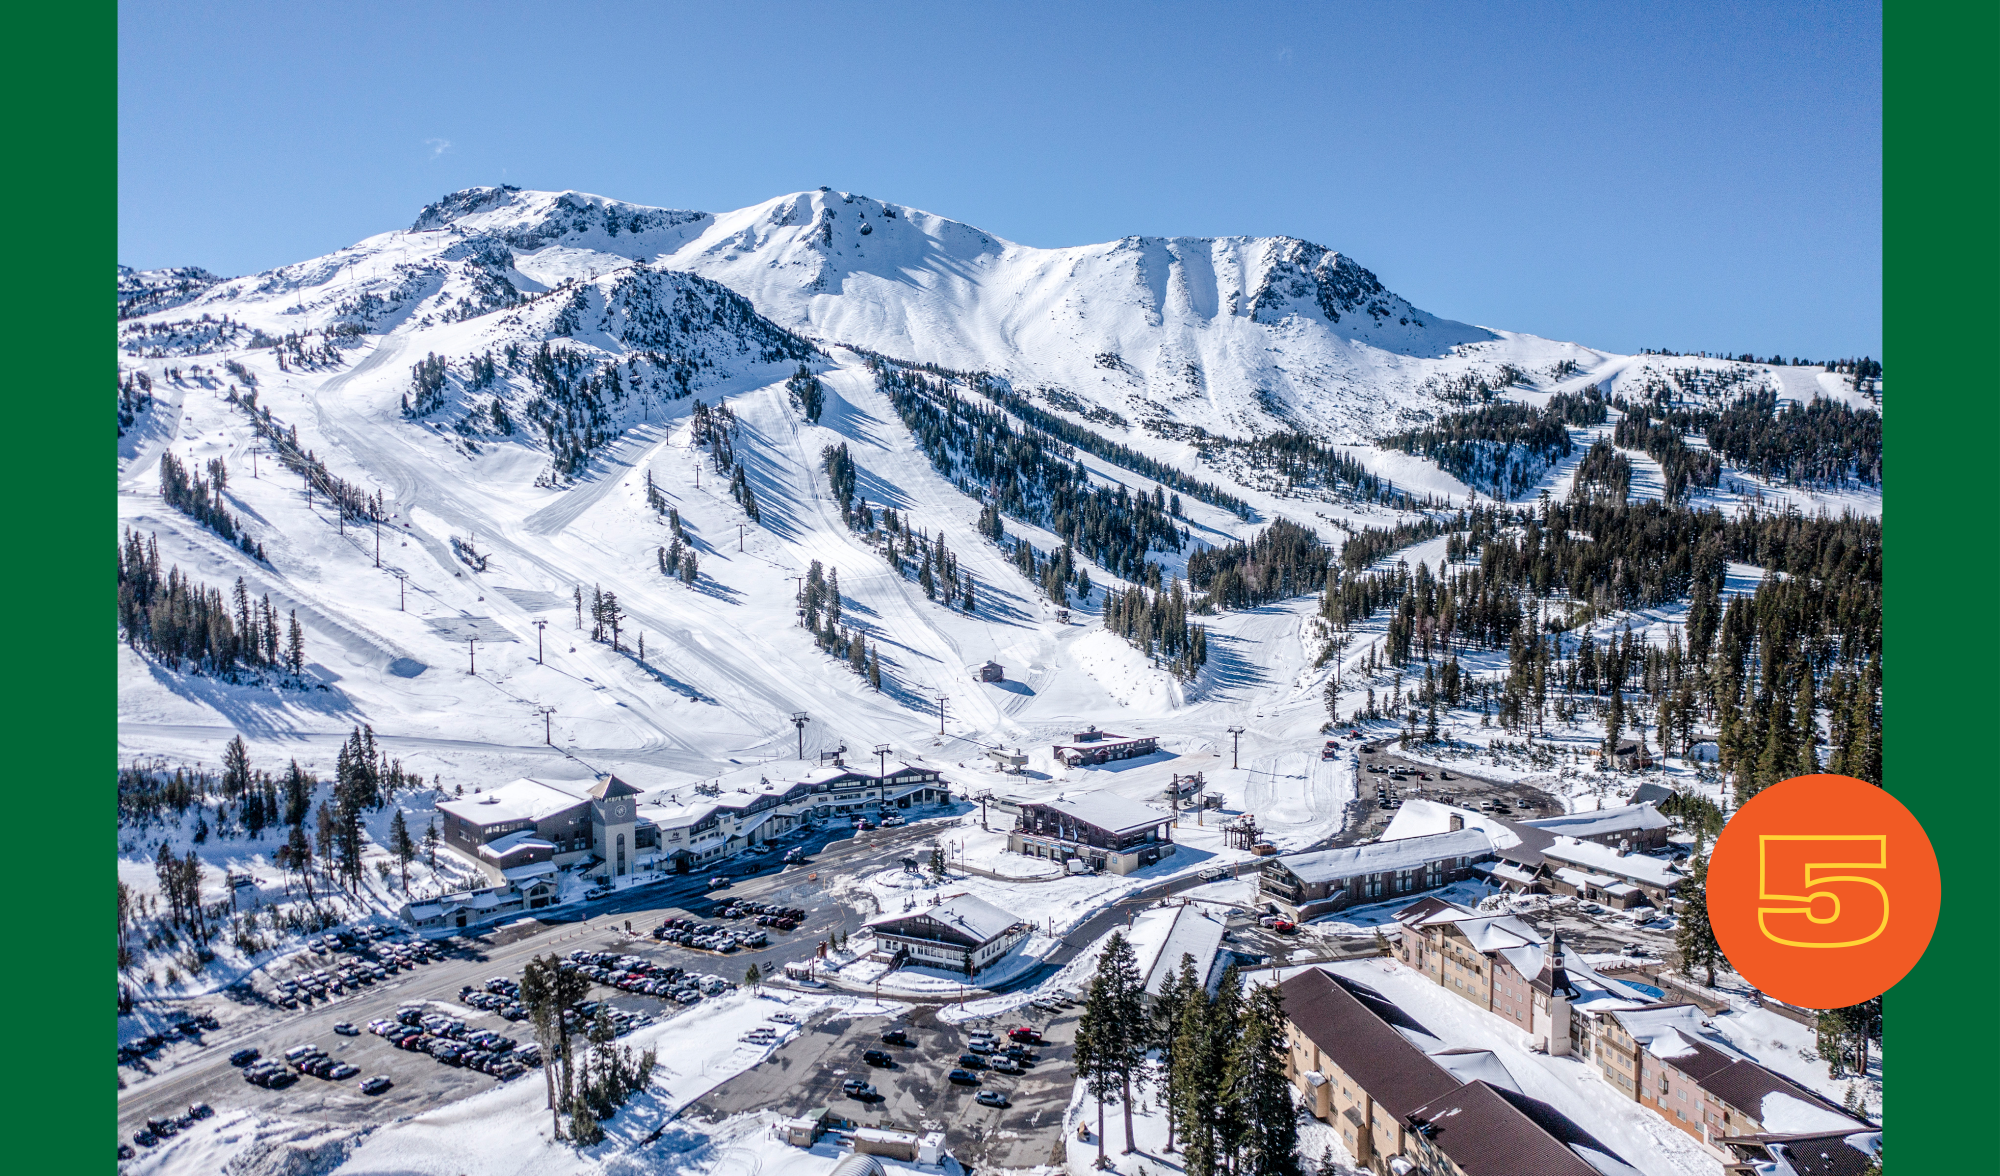 Aerial view of snow-covered mountains at Mammoth Mountain ski resort